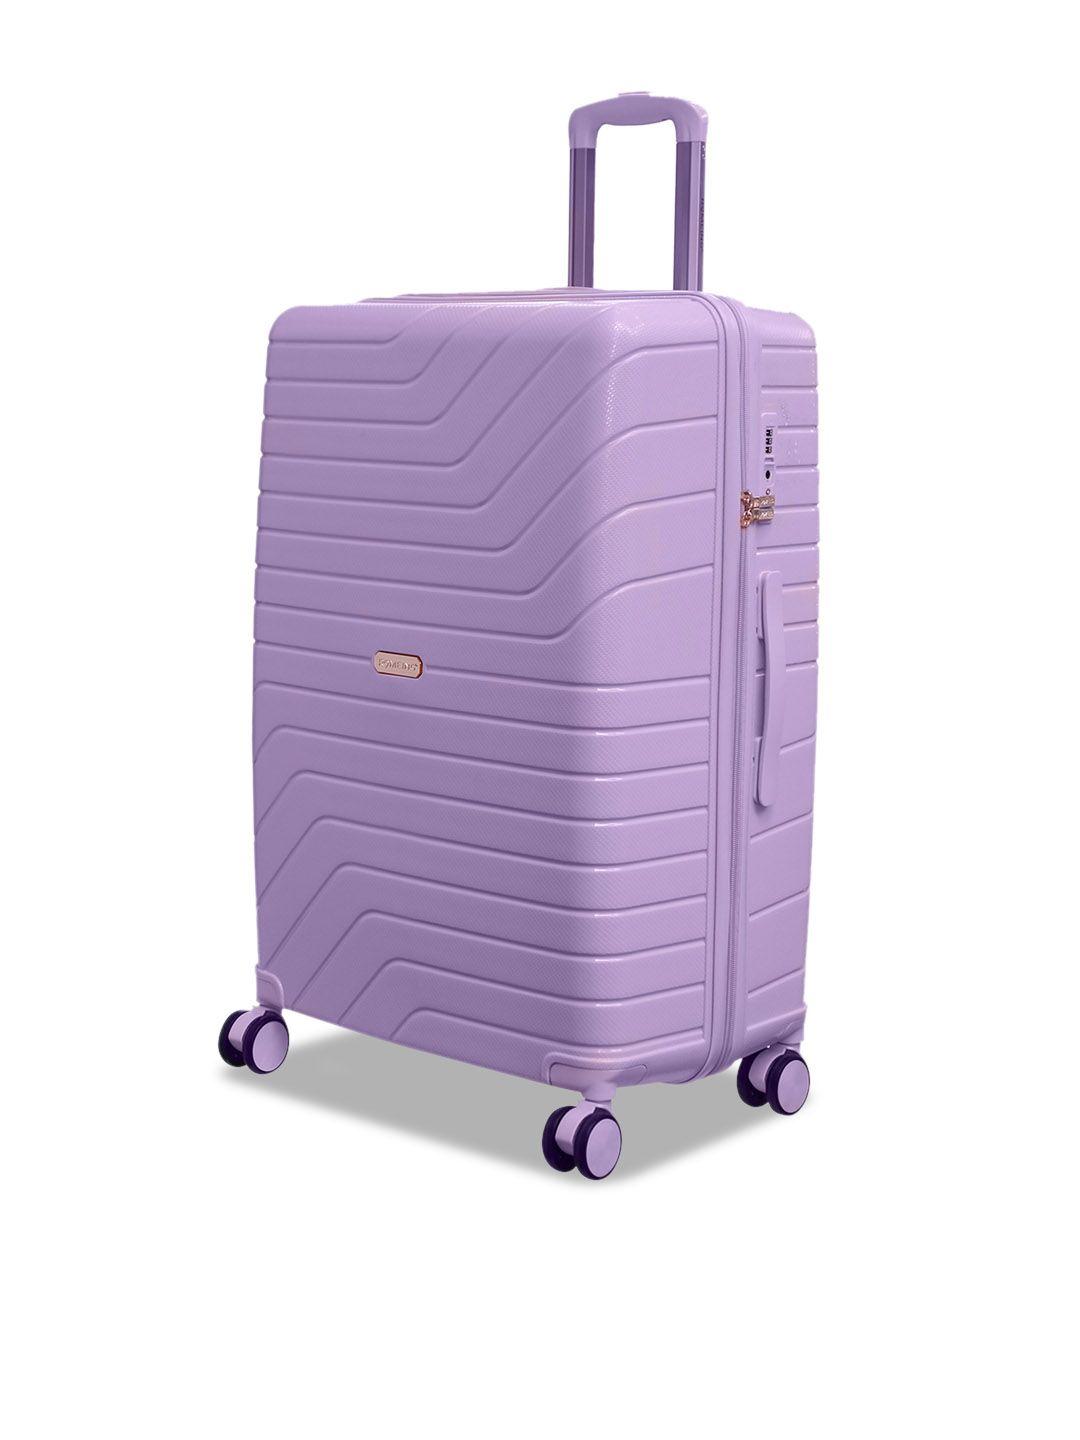 romeing tuscany textured hard-sided large trolley suitcase